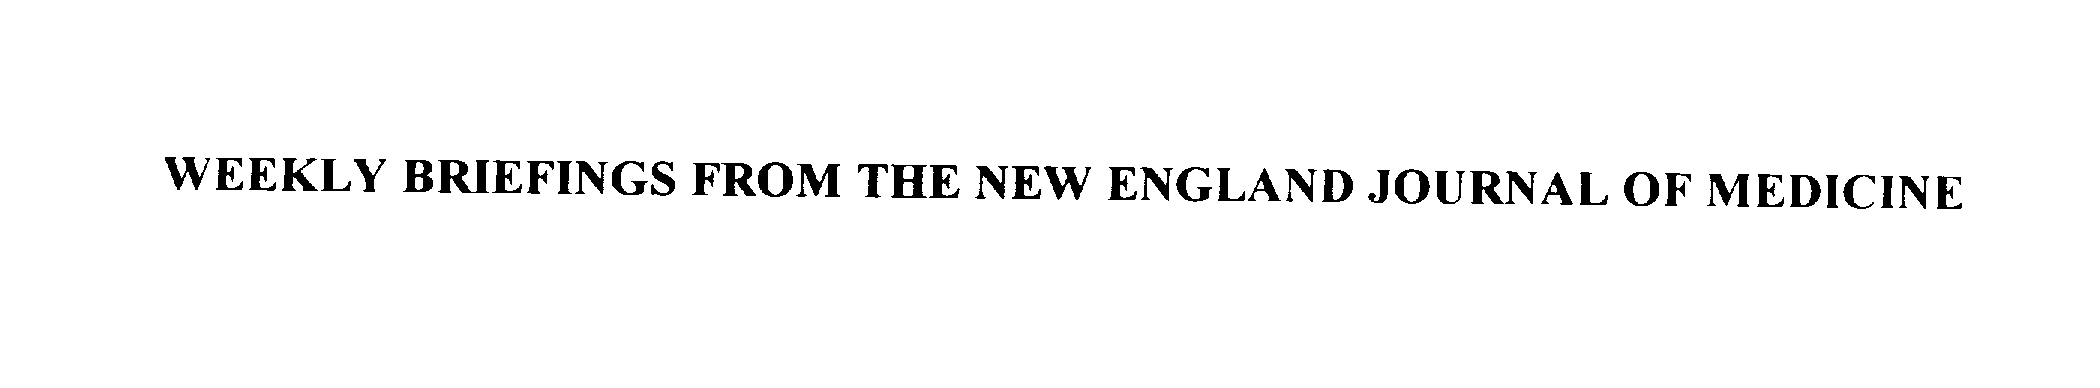  WEEKLY BRIEFINGS FROM THE NEW ENGLAND JOURNAL OF MEDICINE